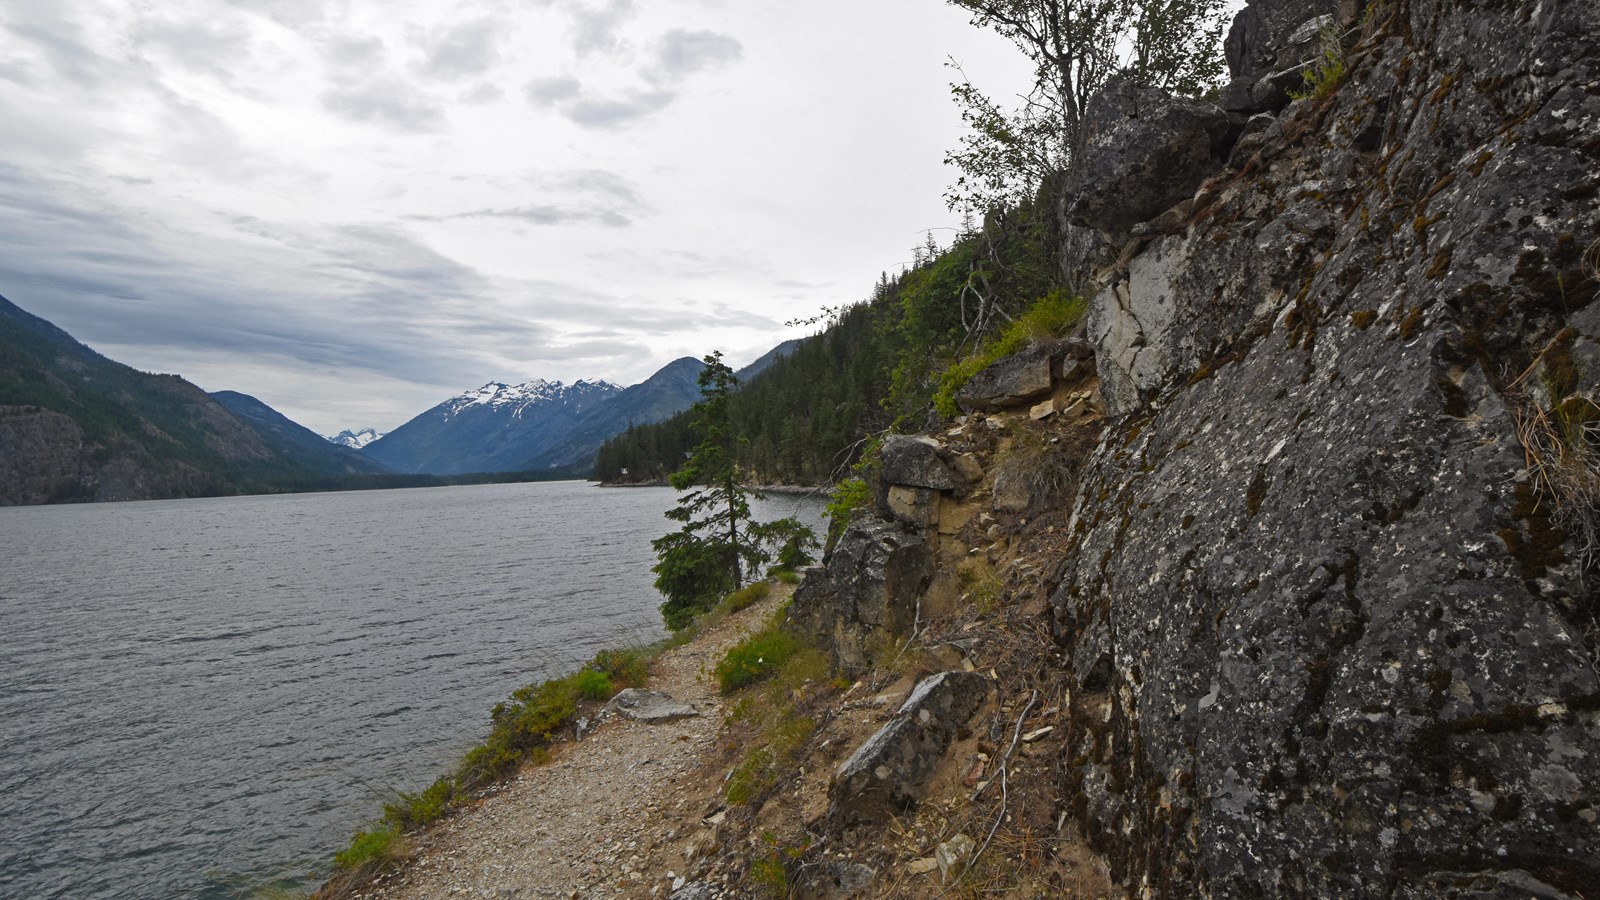 A dirt path follows the shore of a large lake, with snow-capped peaks in the distance.